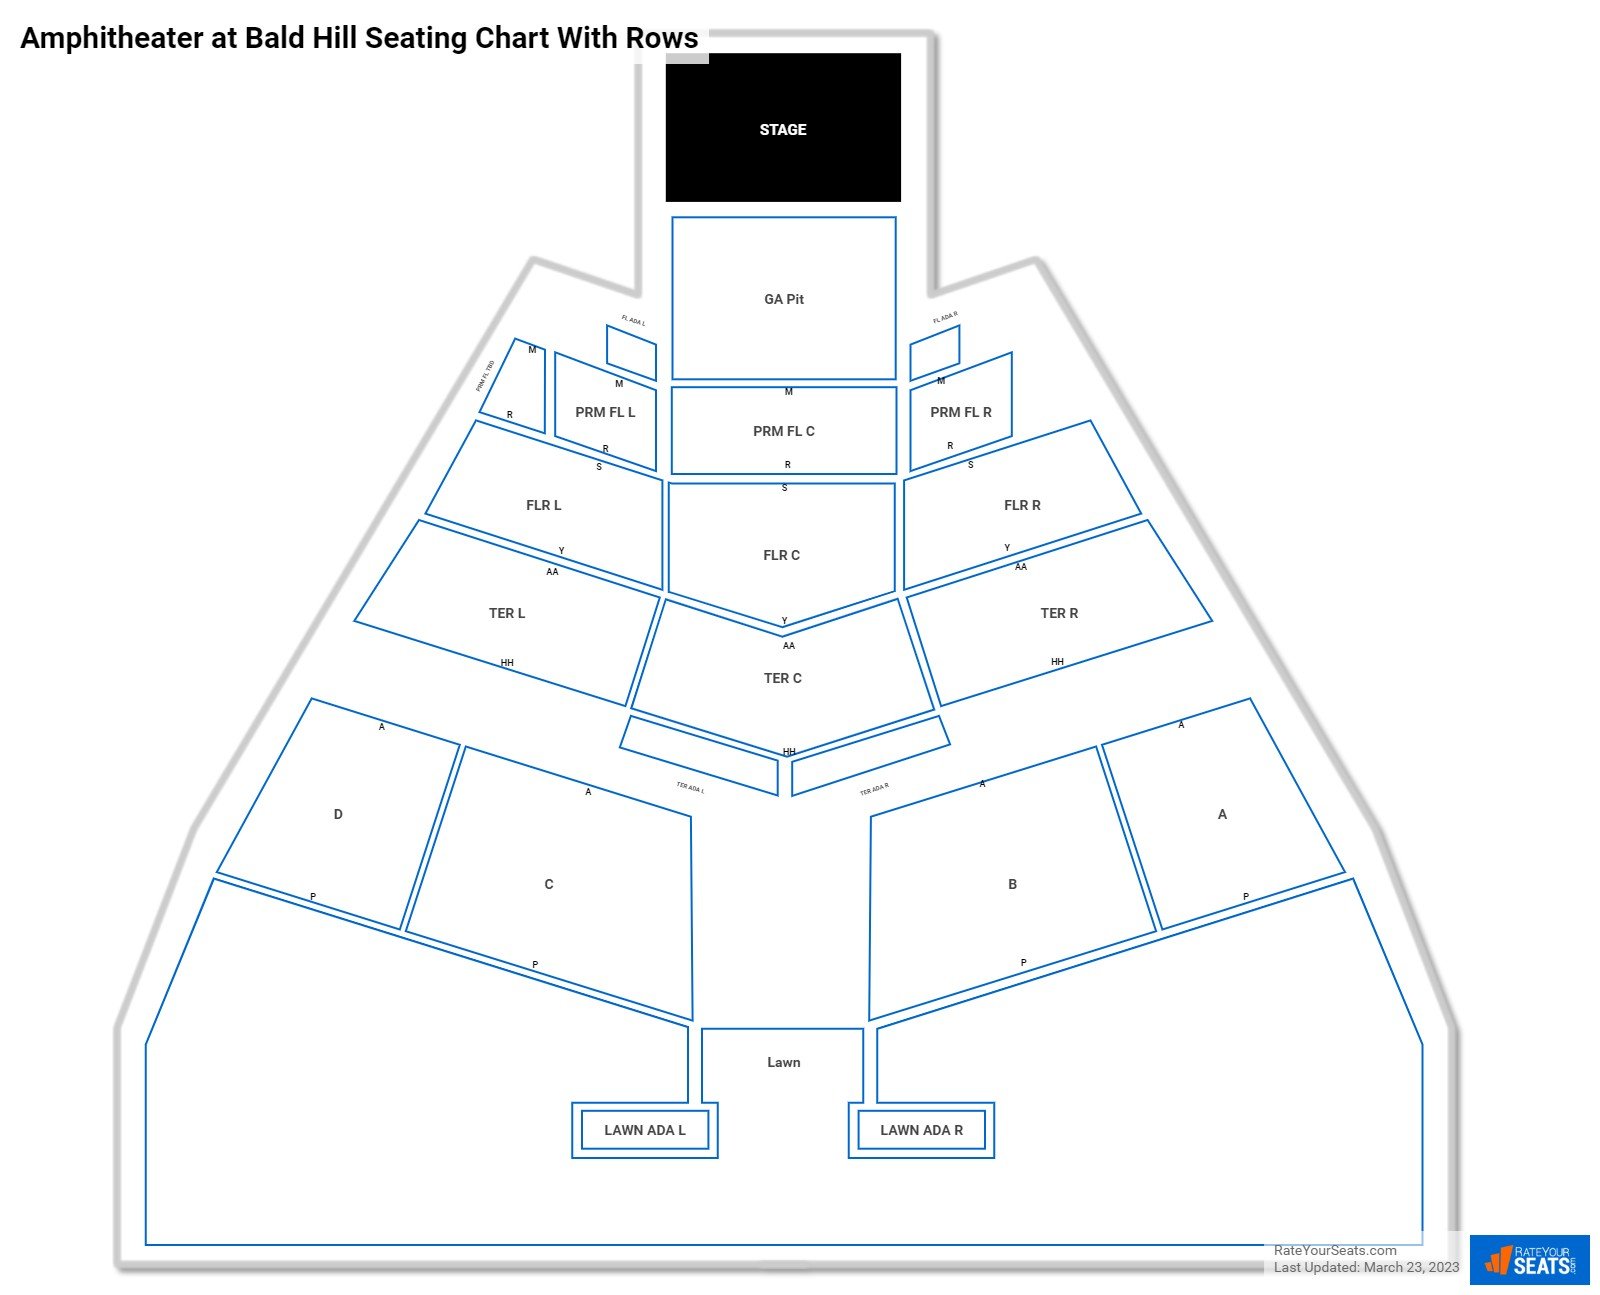 Amphitheater at Bald Hill seating chart with row numbers